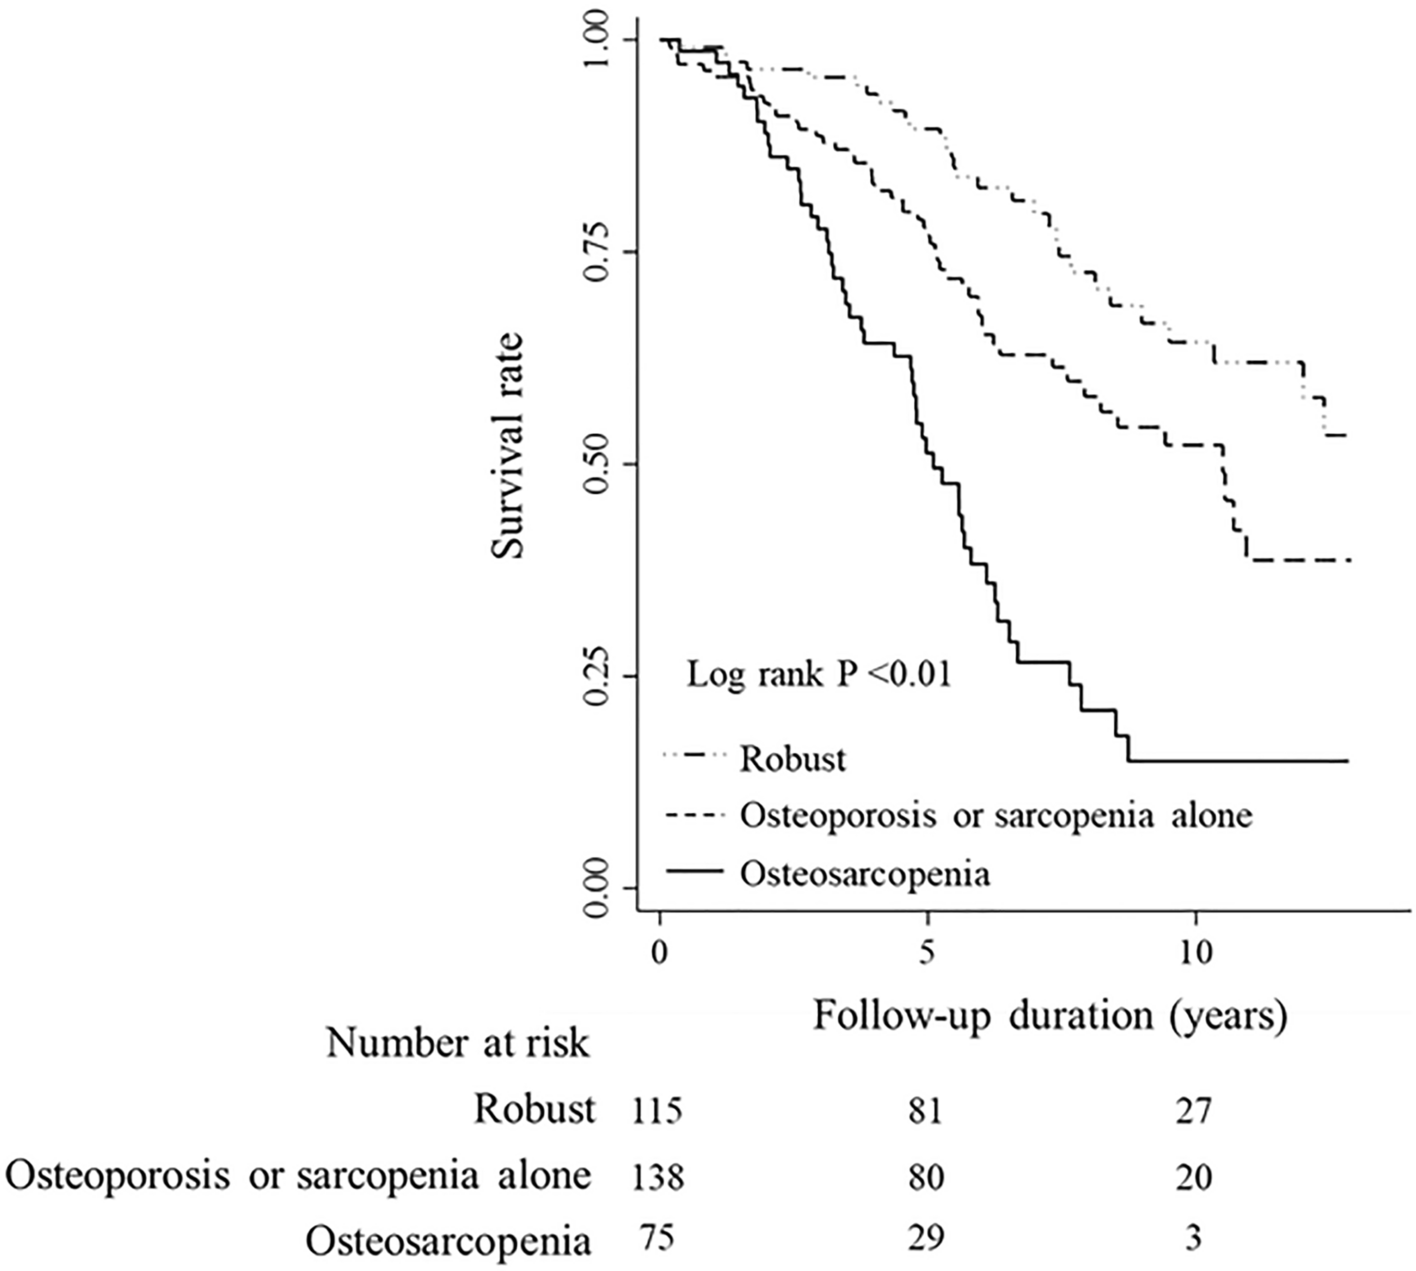 Prevalence of osteosarcopenia and its association with mortality and fractures among patients undergoing hemodialysis